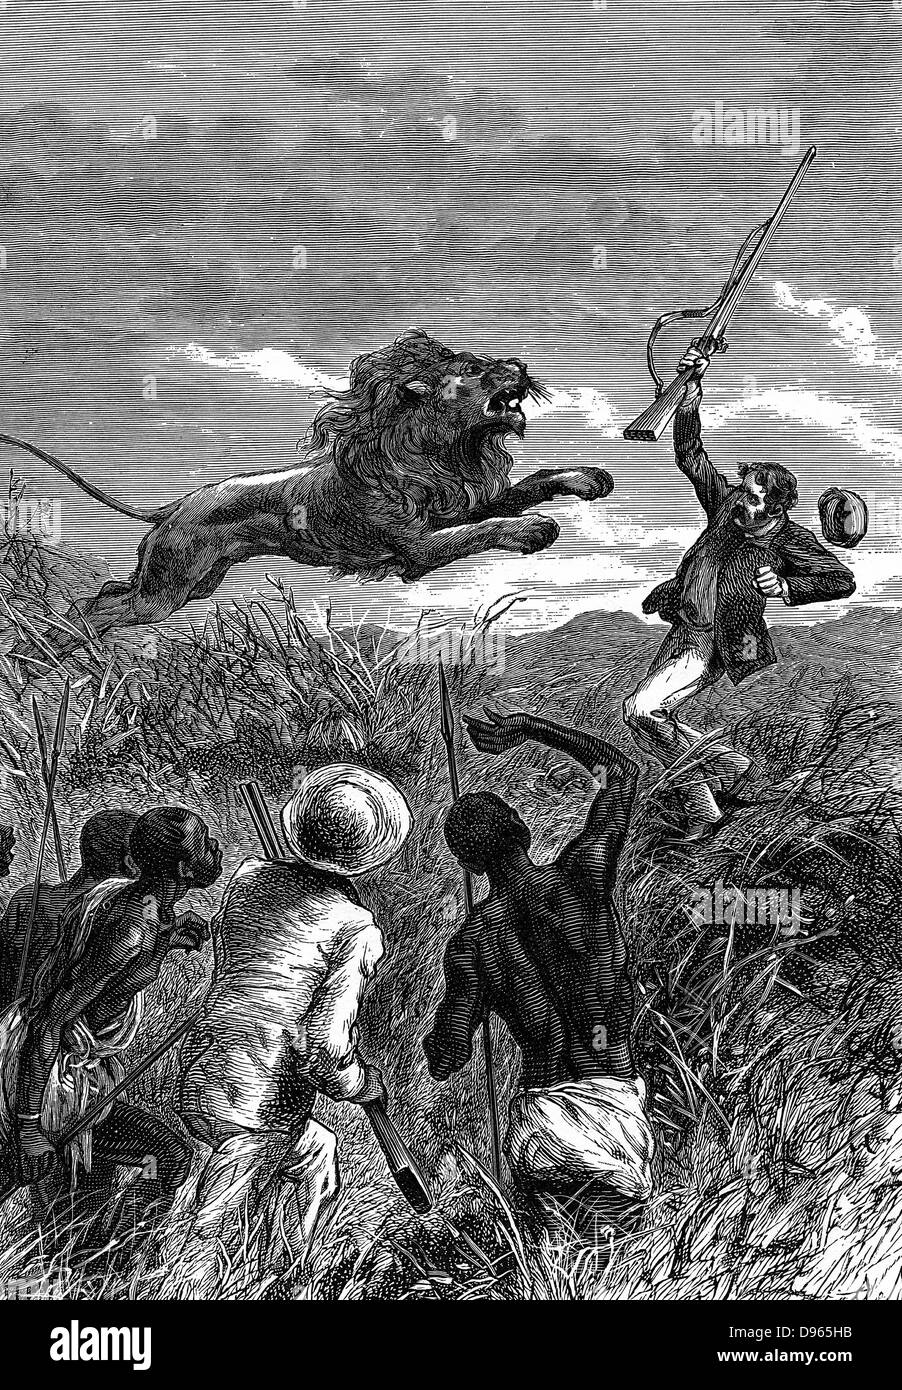 David Livingstone (1813-1873) Scottish missionary and African explorer. Livingstone being charged by a lion. Saved by Mebalwe, a native schoolmaster, who shot the animal. From 'Heroes of Britain' Edwin Hodder (London c1860). Wood engraving. Stock Photo